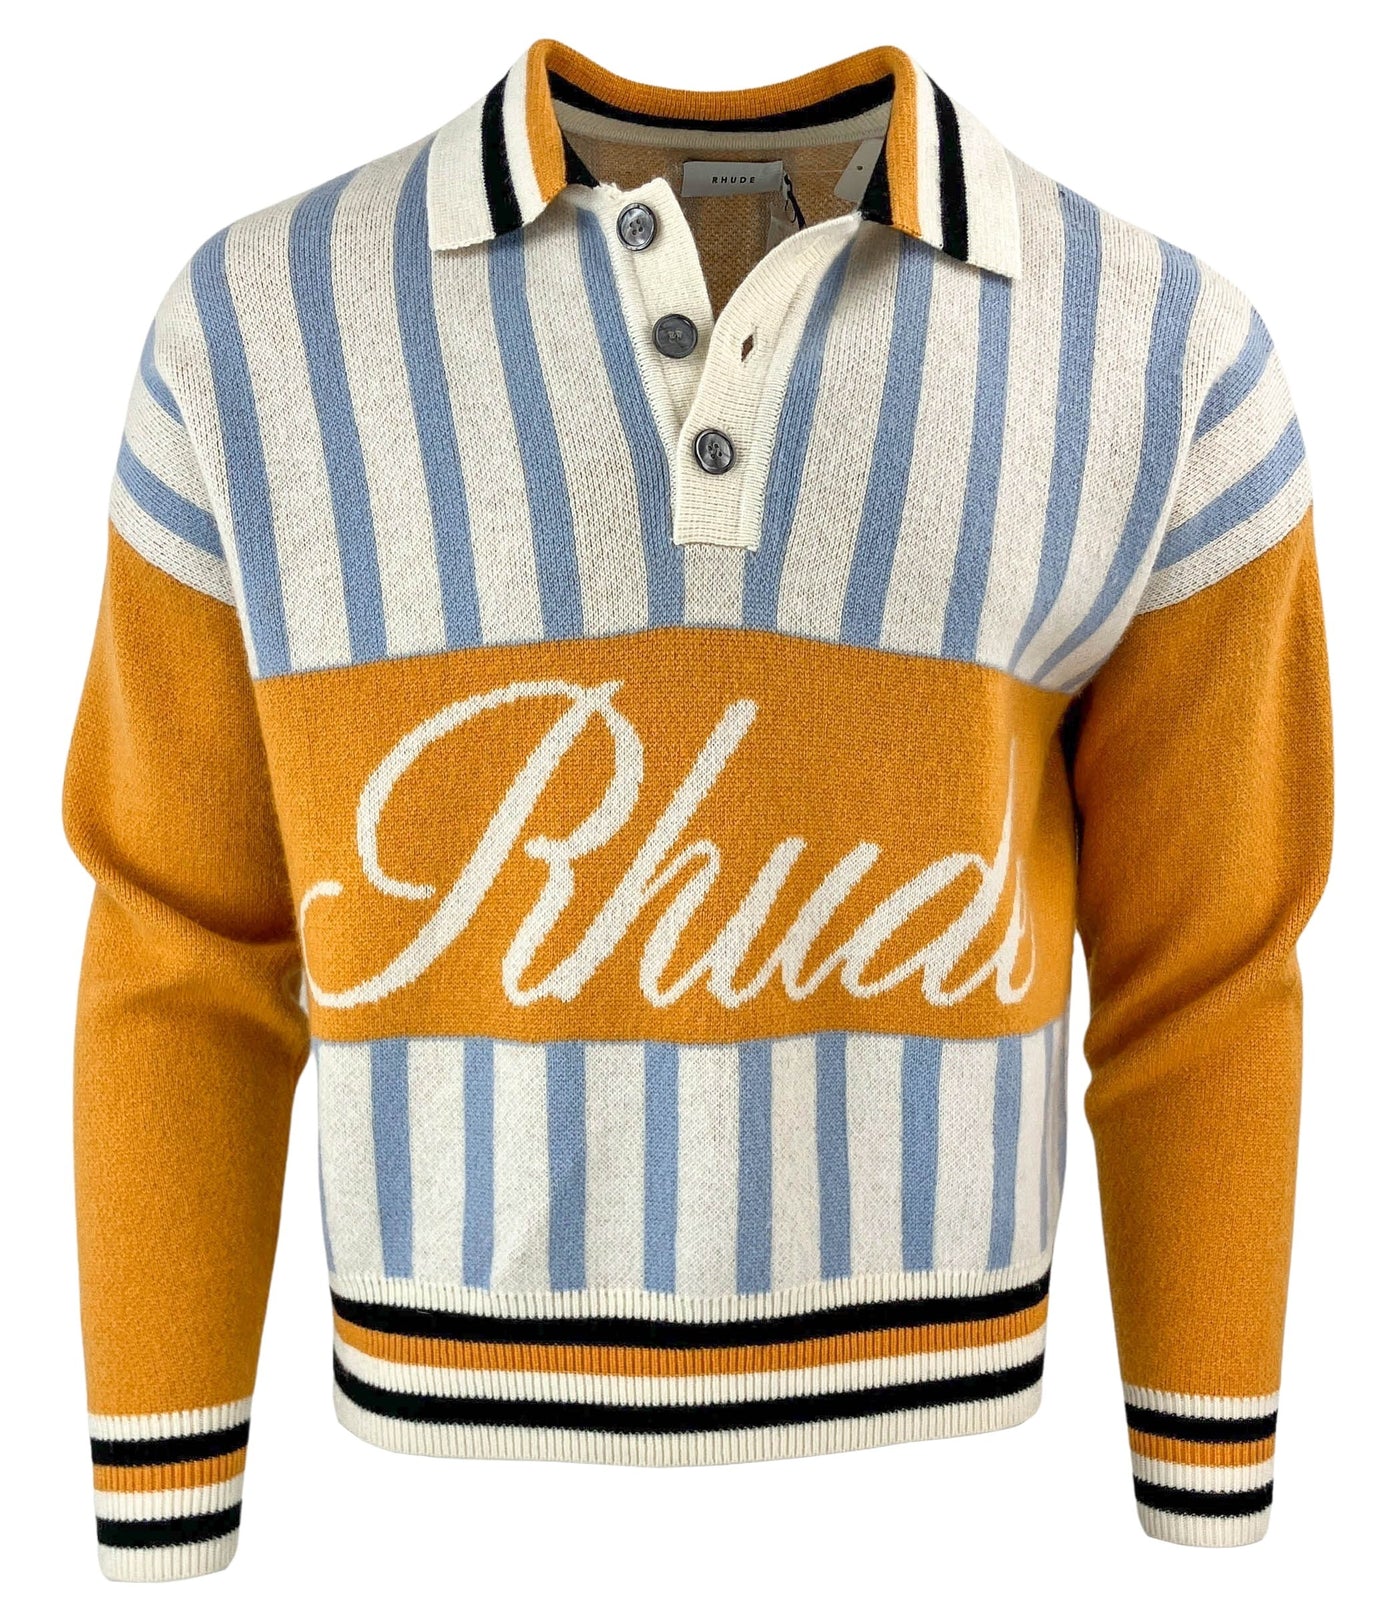 RHUDE Amber Knit Rugby Polo Shirt in Multi - Discounts on RHUDE at UAL